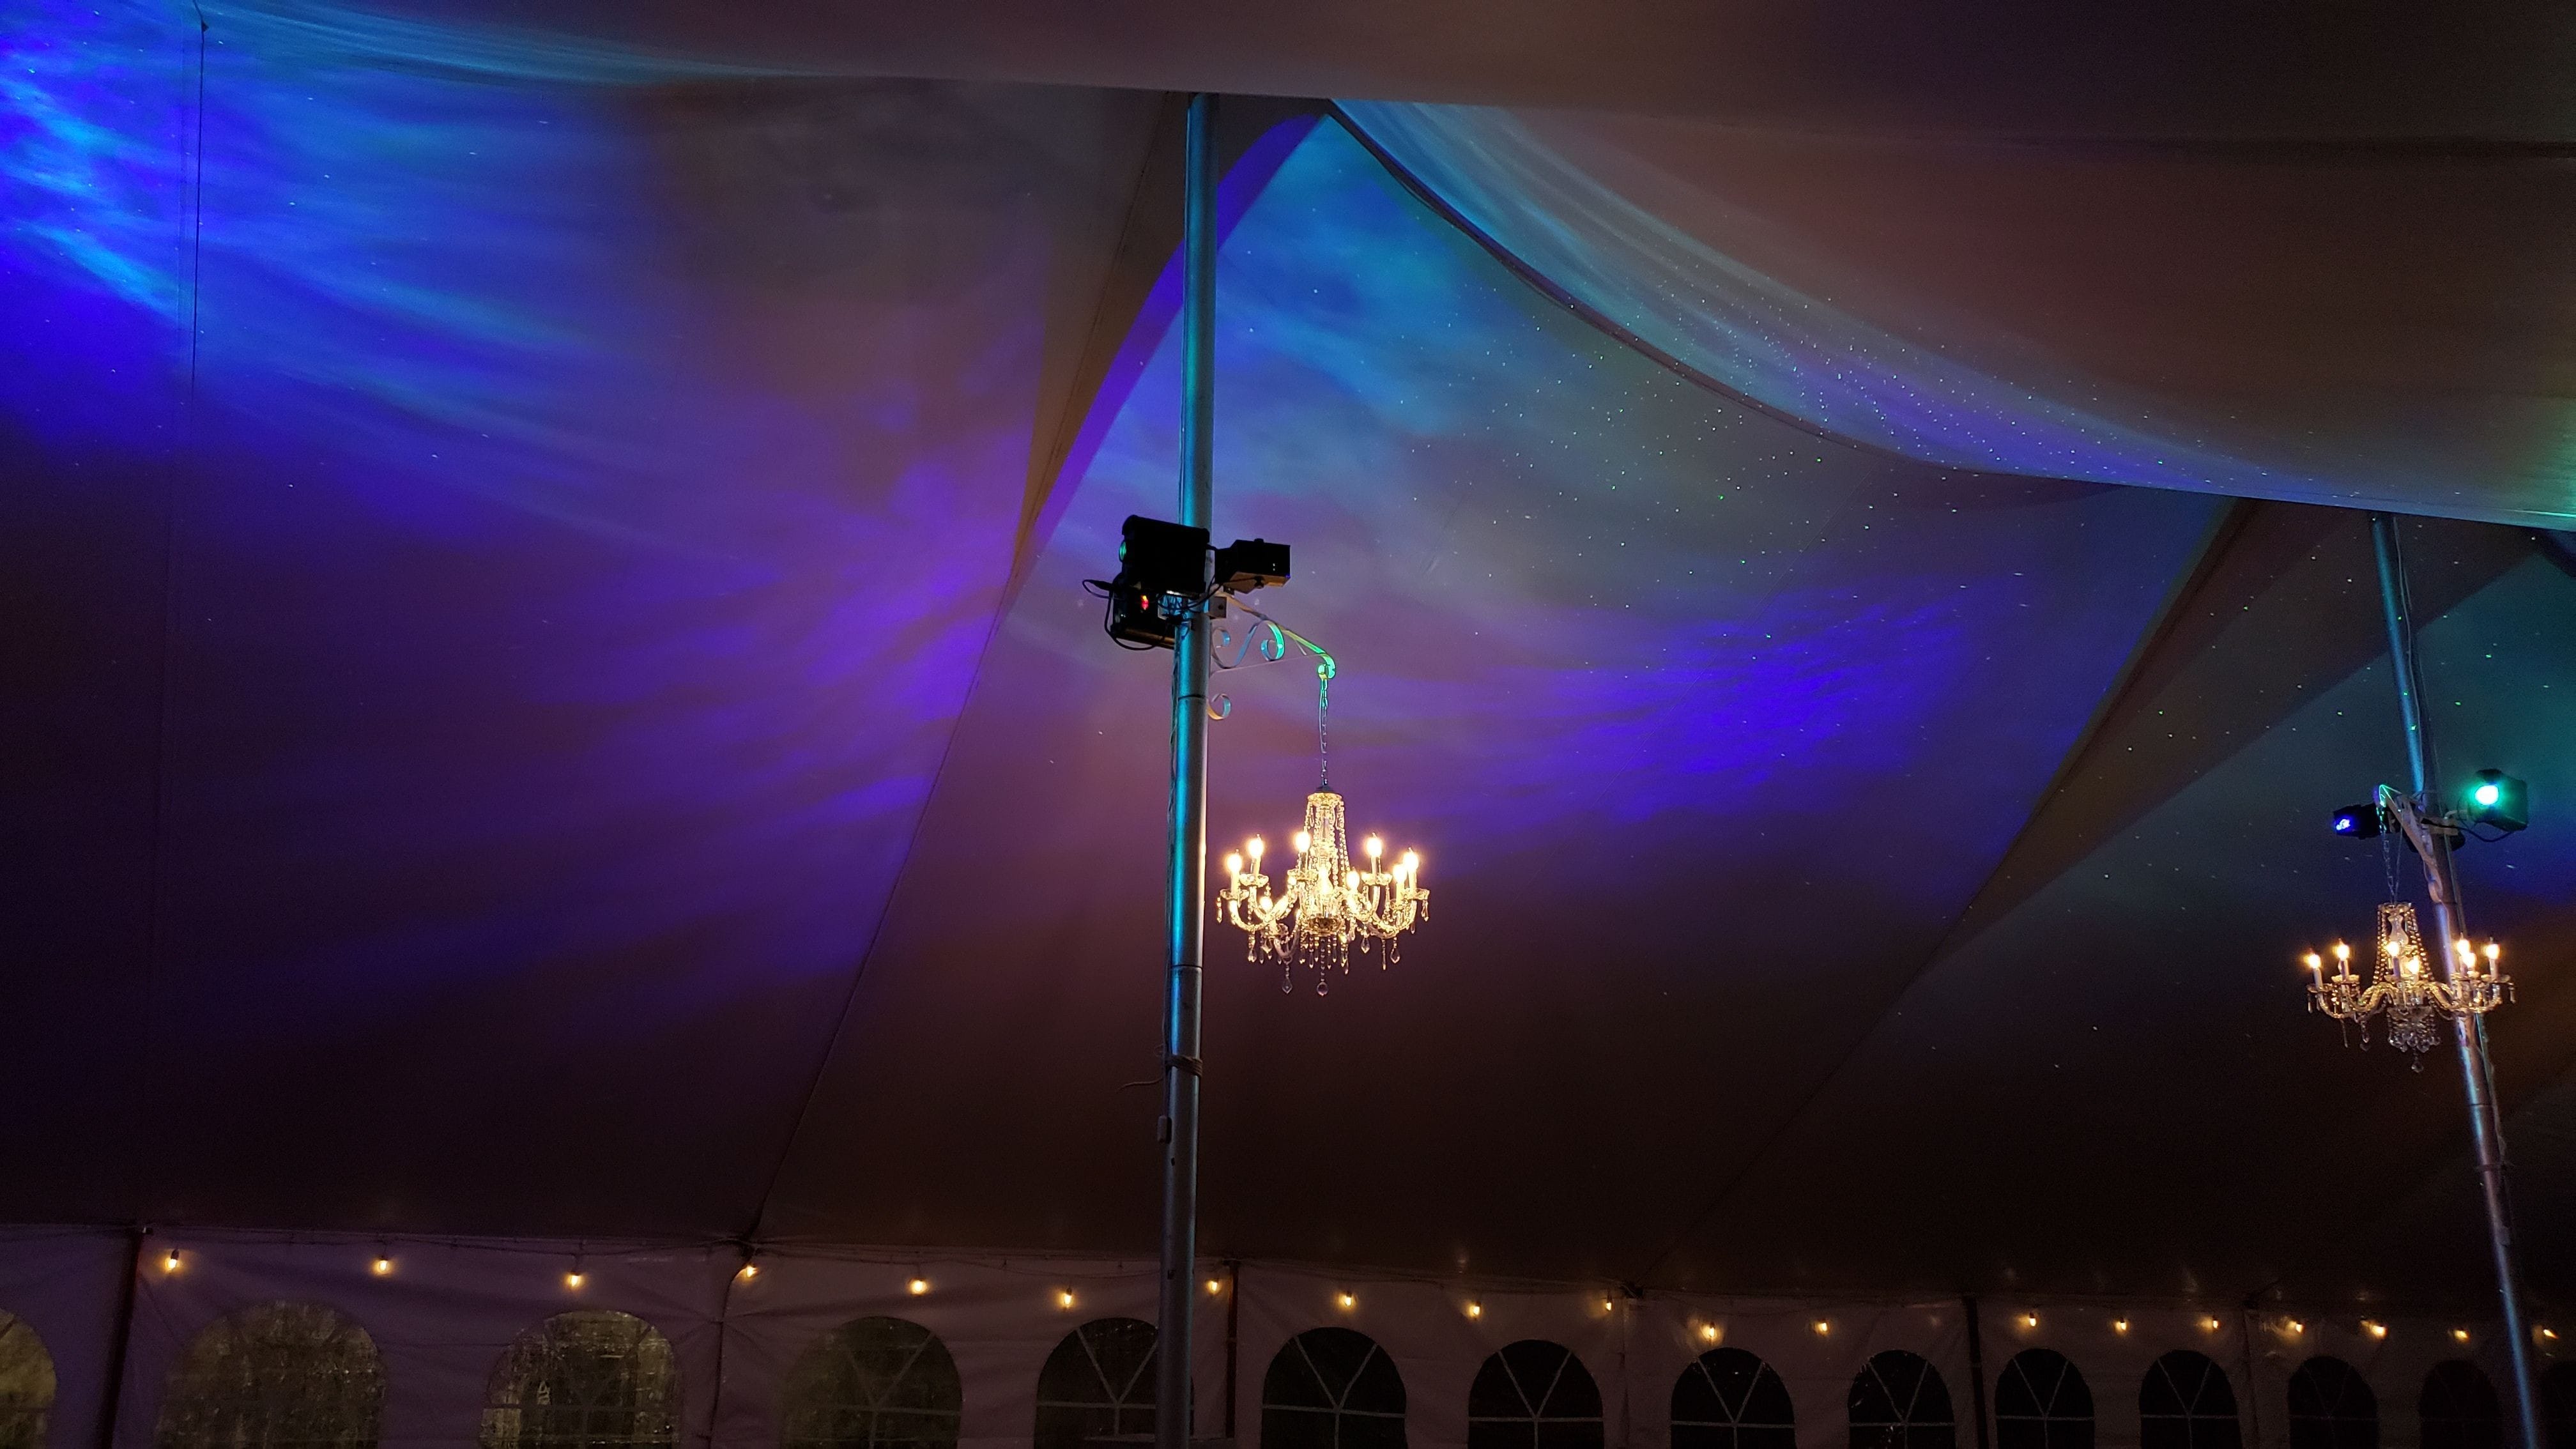 Tent wedding lighting. Four chandeliers with Stars and Northern Lights with perimeter bistro.